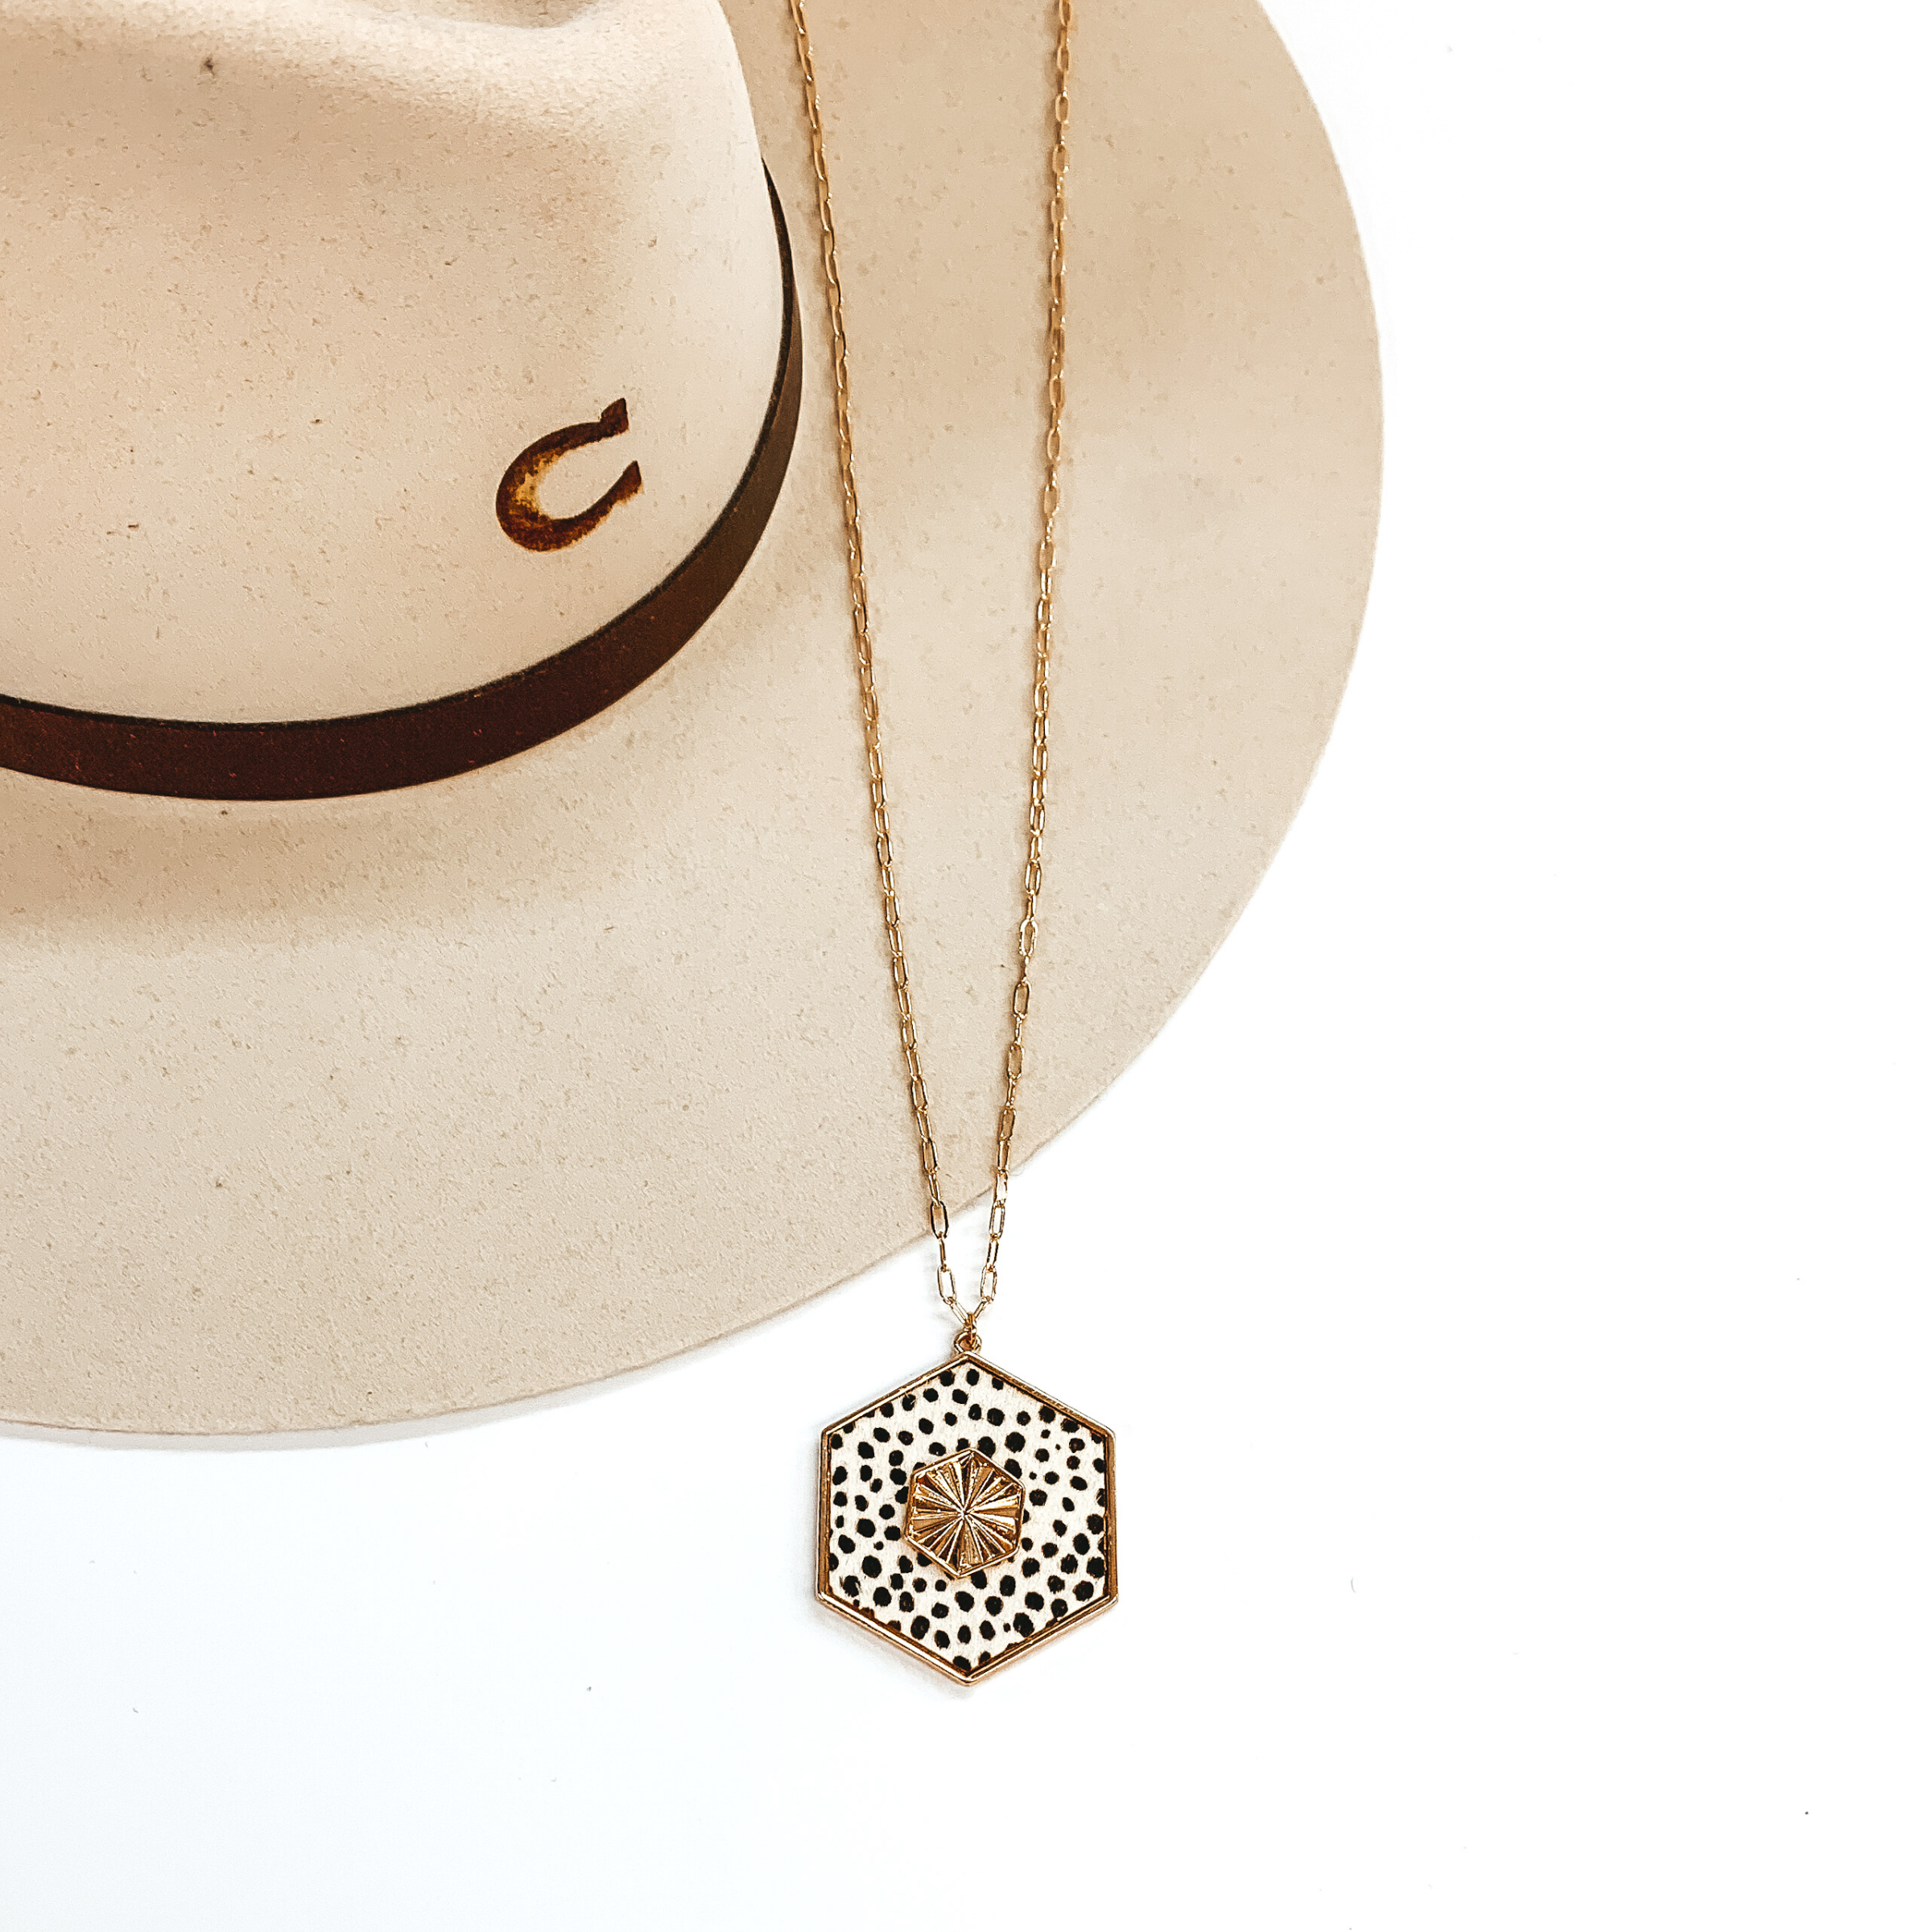 Long Gold Chain Necklace with a Hexagon Pendant in Ivory Cheetah Print - Giddy Up Glamour Boutique